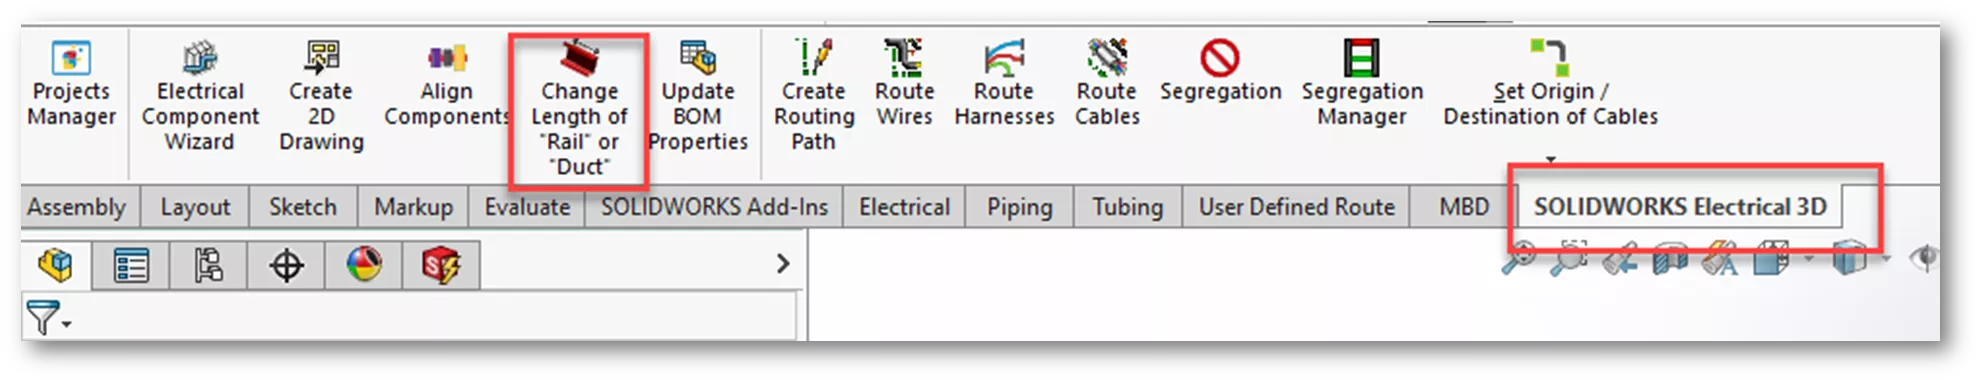 Change Length of Rail Or Duct Option in SOLIDWORKS Electrical 